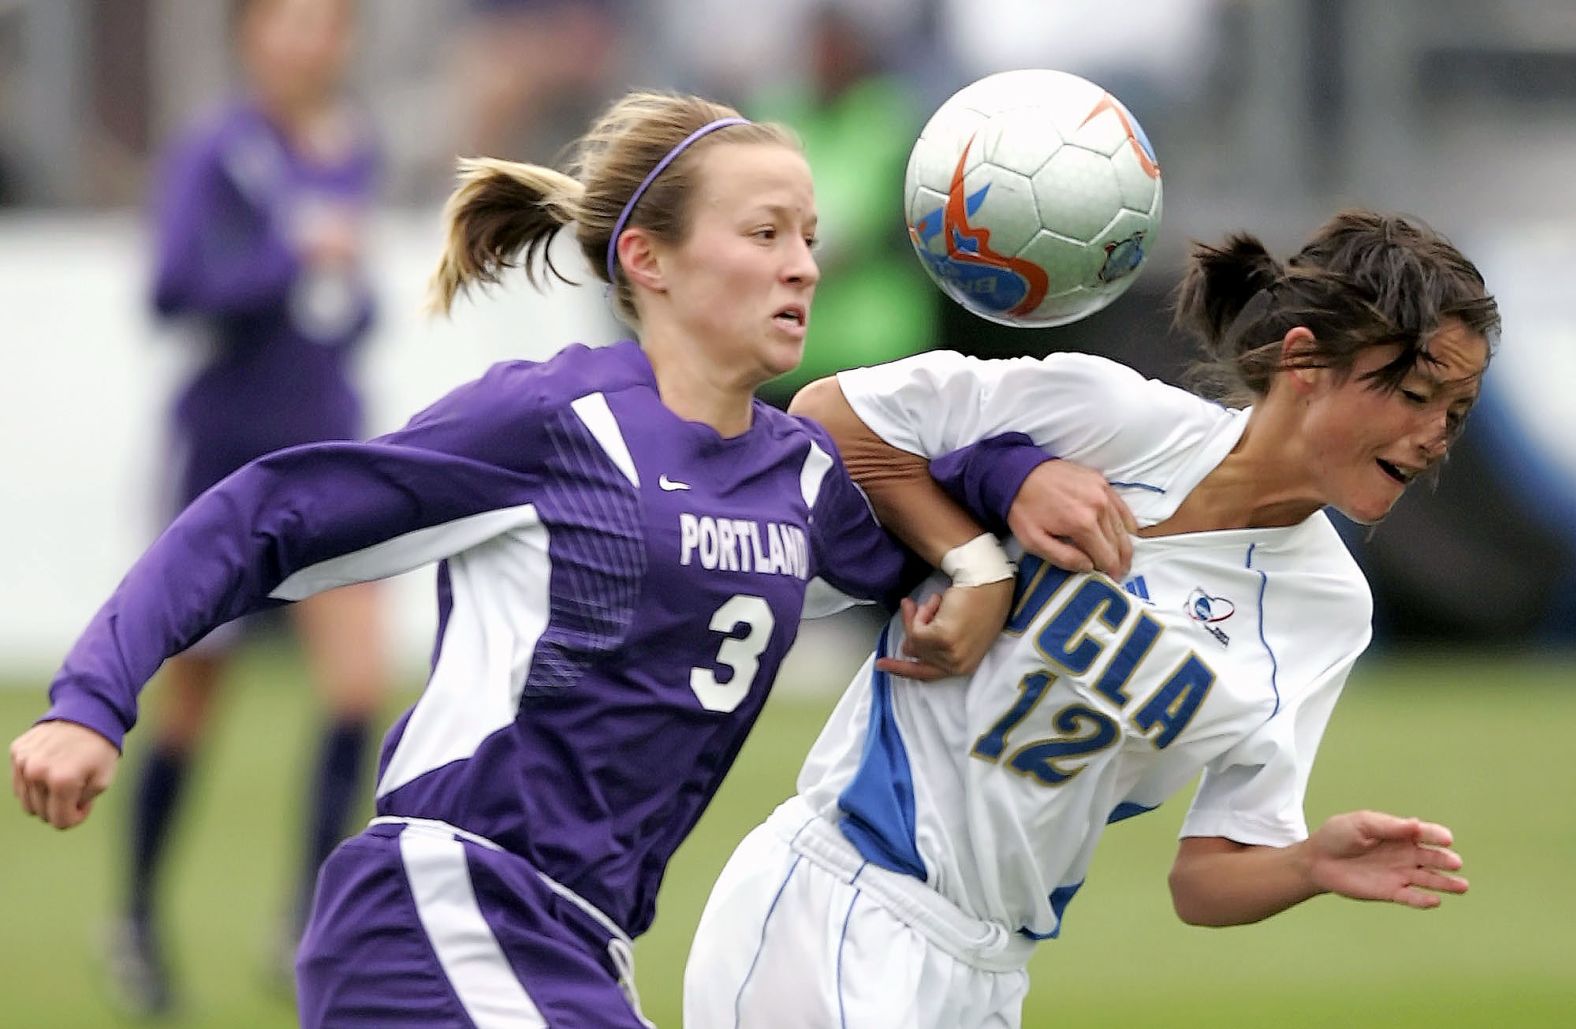 Rapinoe battles for the ball during the 2005 NCAA Championship in College Station, Texas. Rapinoe's Portland Pilots defeated UCLA to win the title.